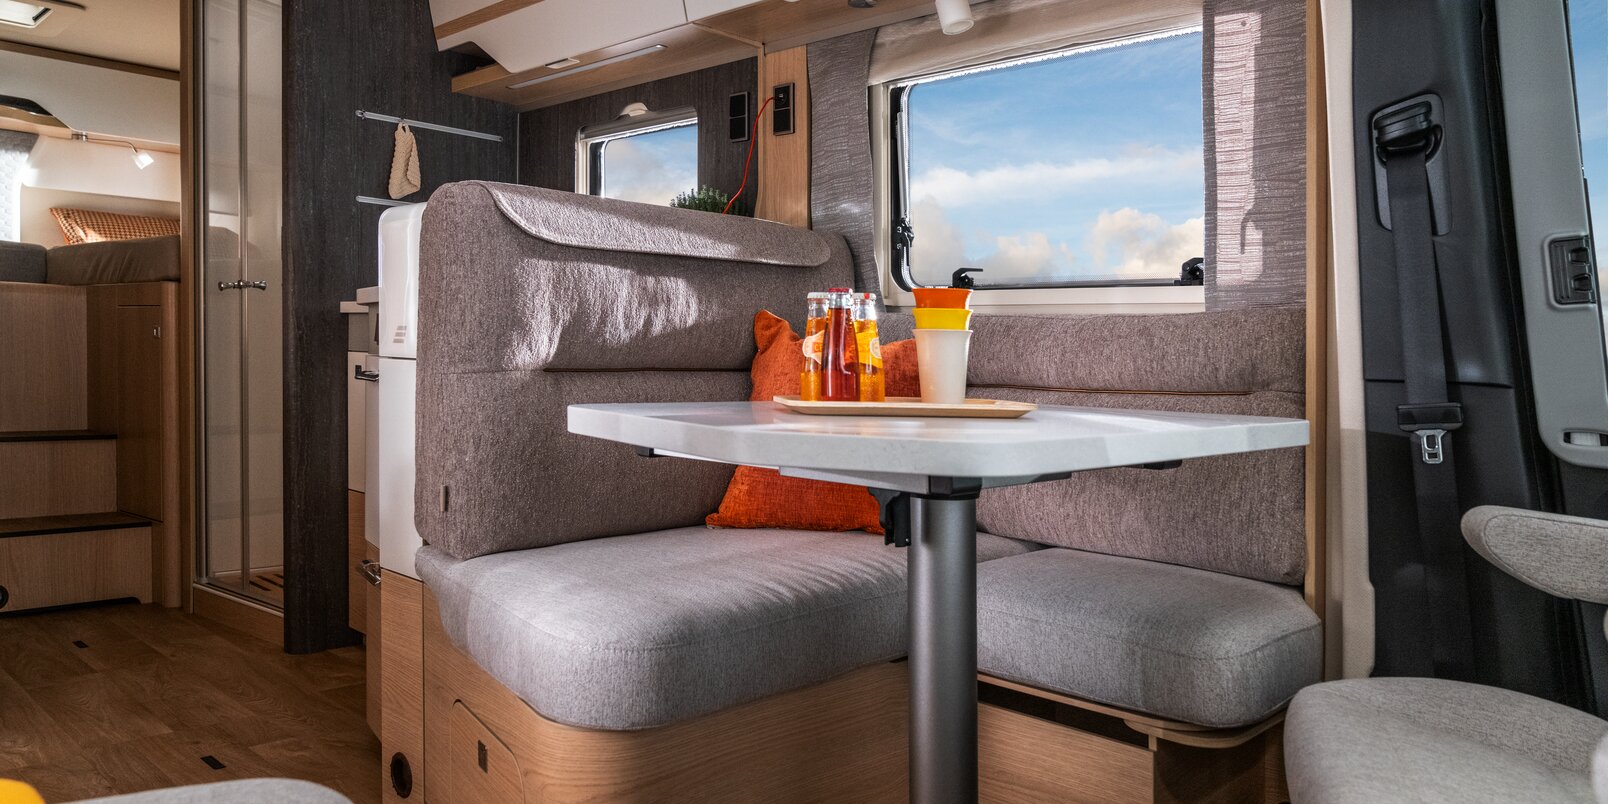 View from the covered seating area and kitchen block through the windows of the HYMER B ML-T 780 of the sunny blue sky